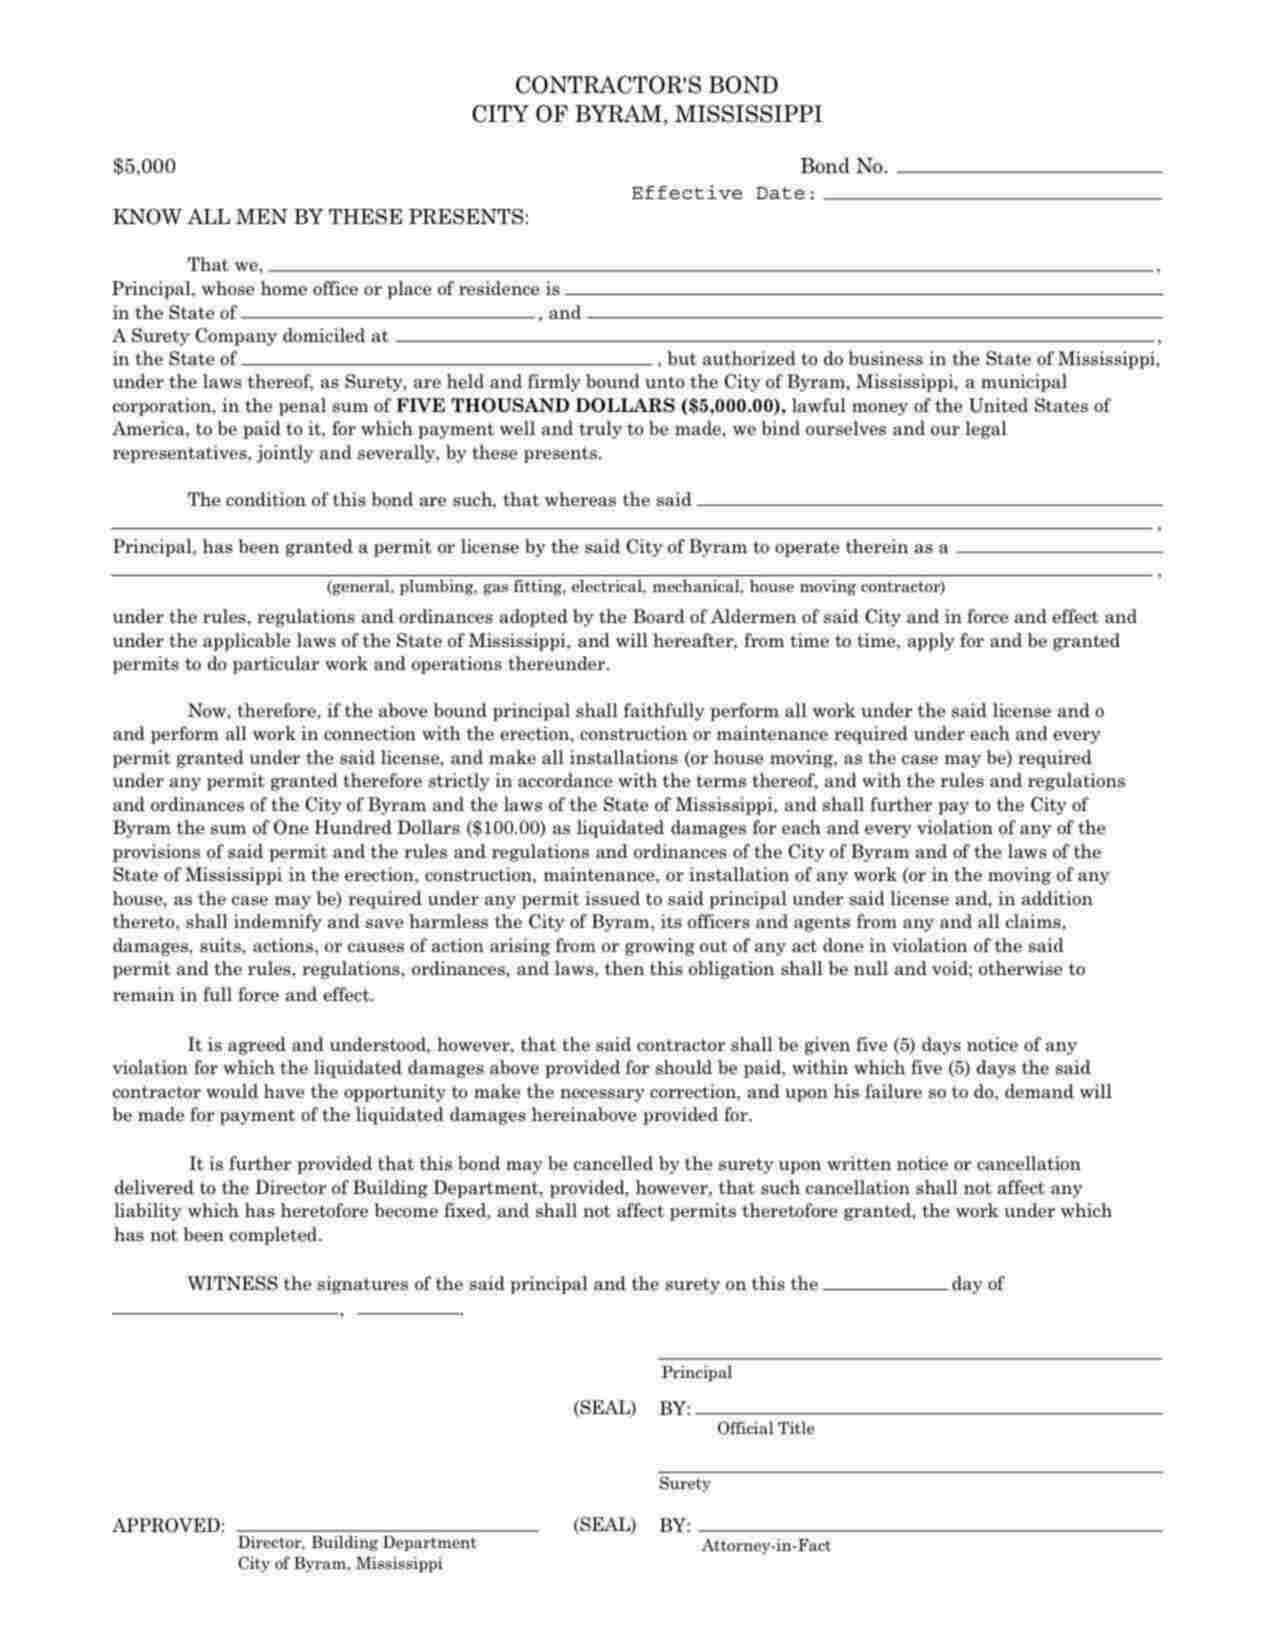 Mississippi Gas Fitting Contractor Bond Form